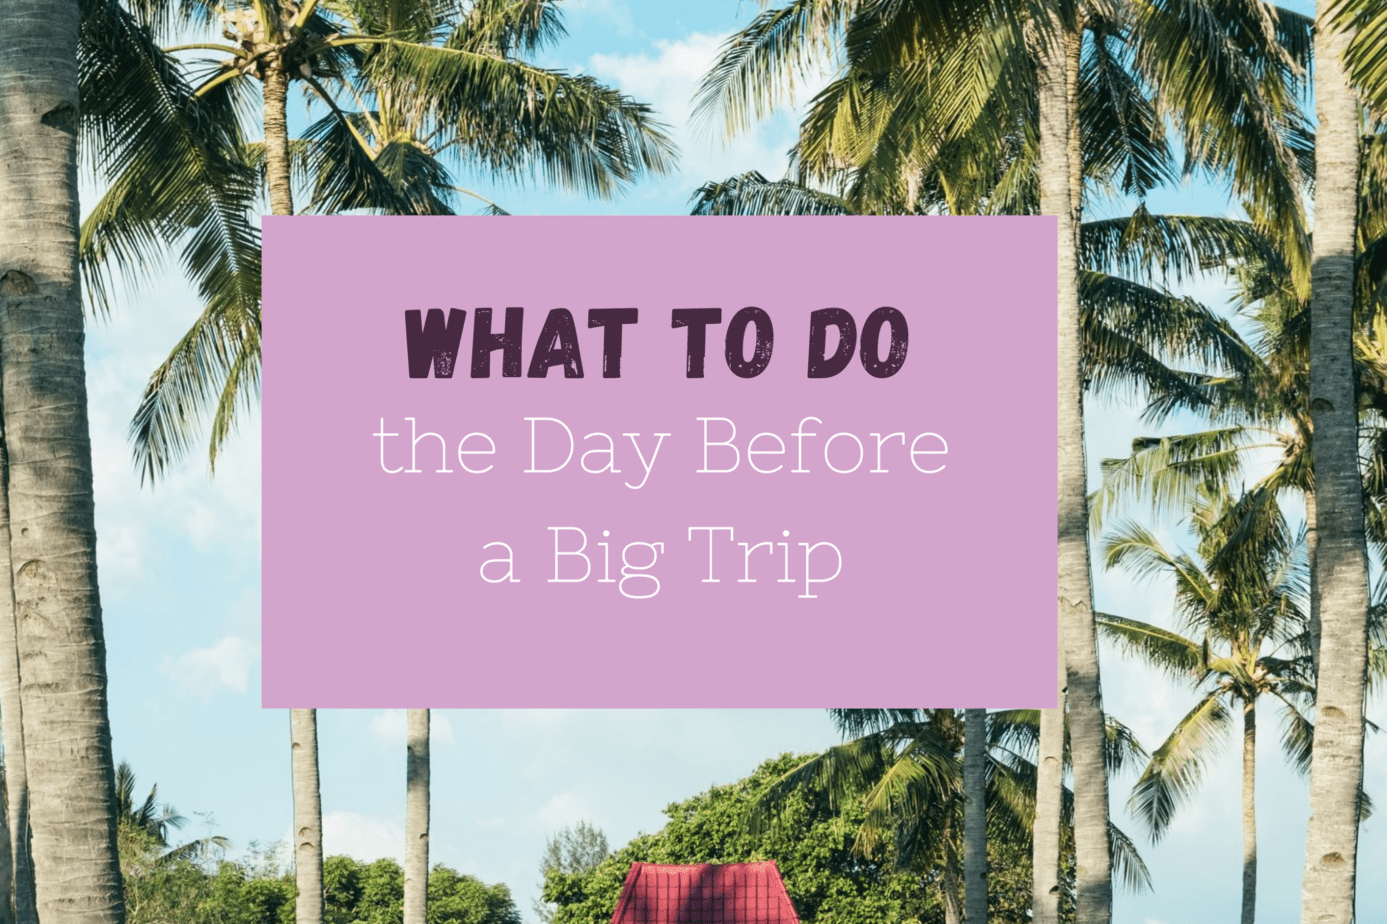 What to do the day before a big trip